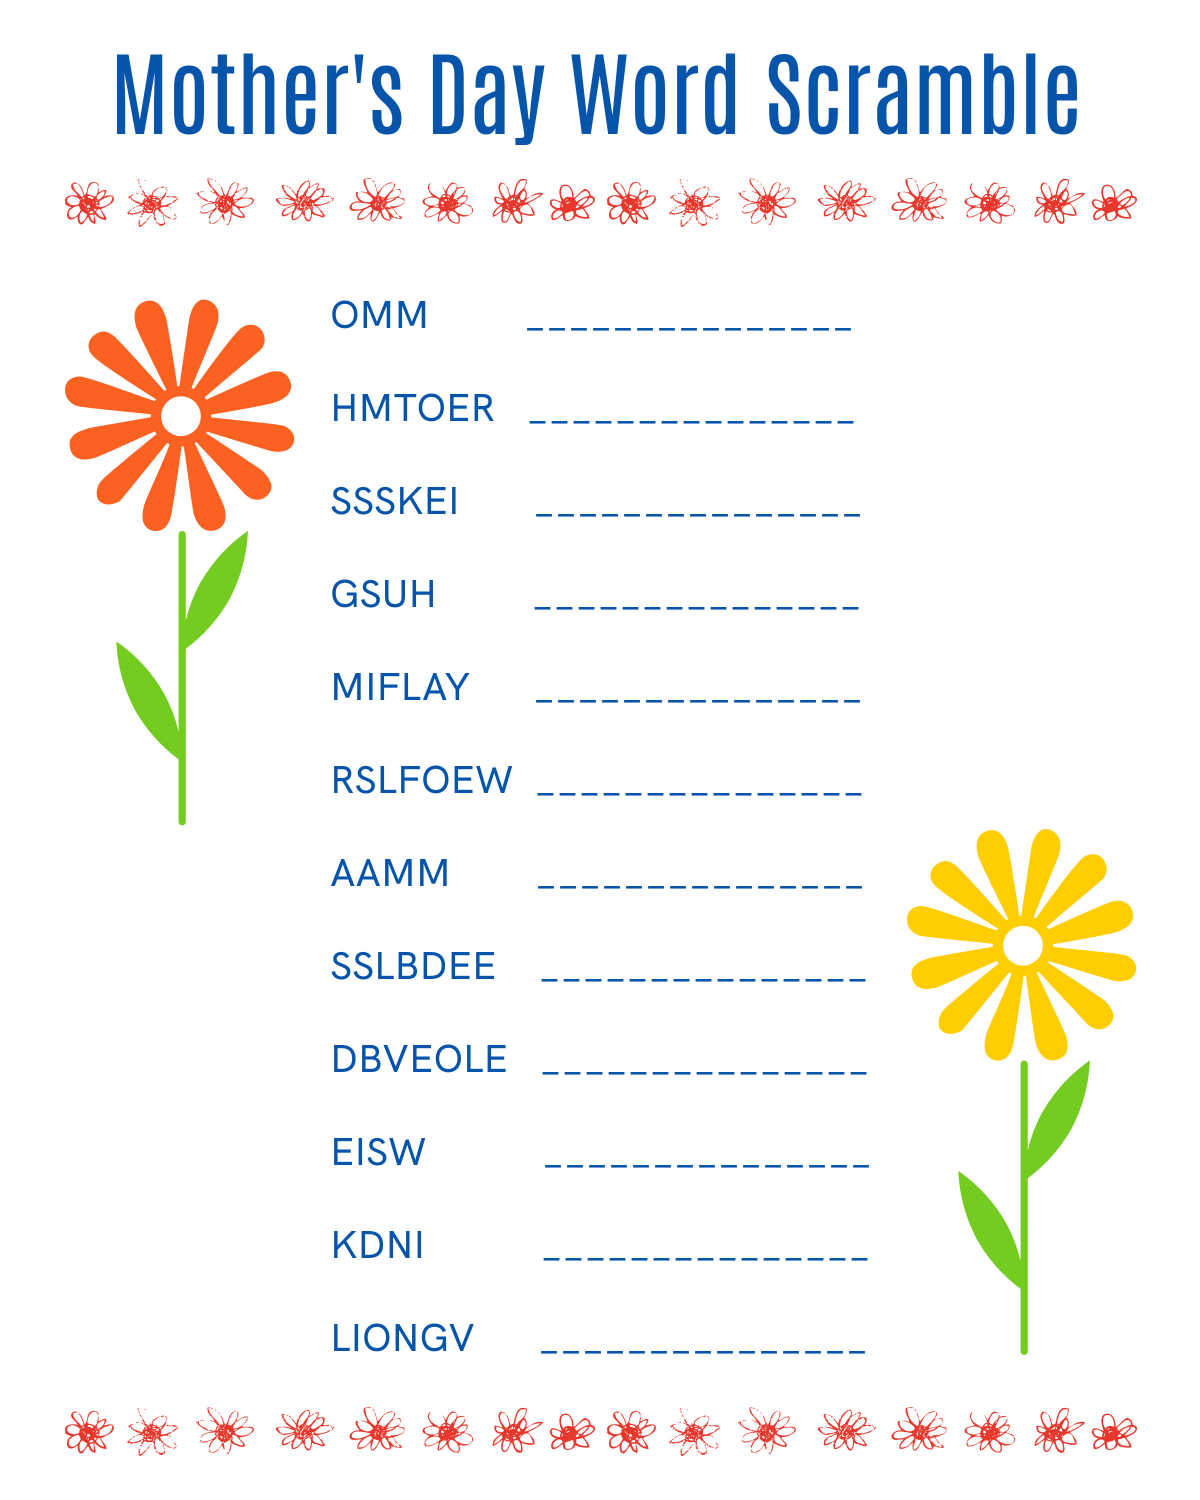 Mothers Day Word Scramble printable